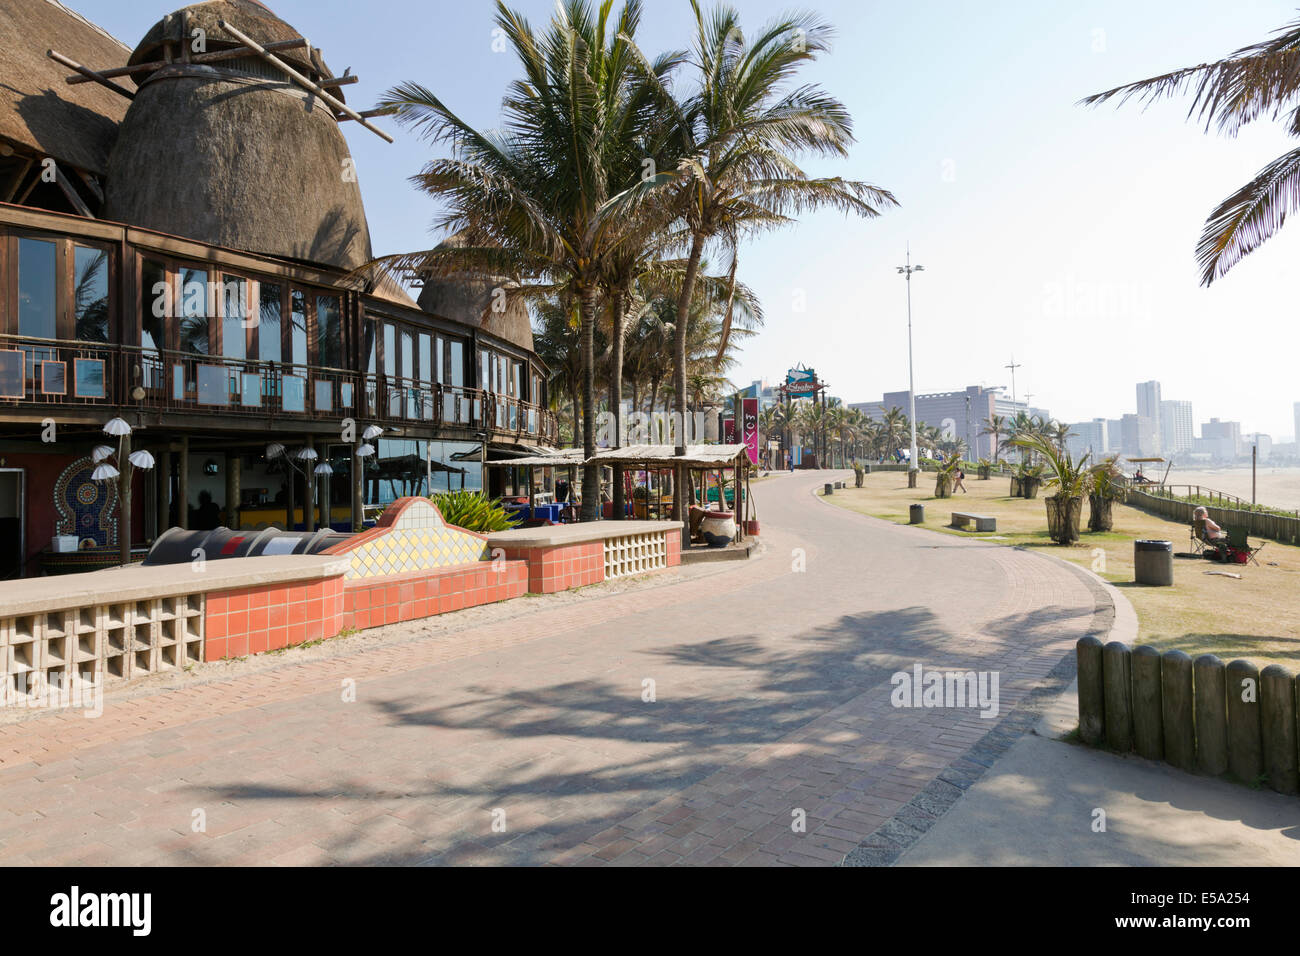 Durban, South Africa. Early morning on Durban's beachfront with Moyo restaurant on the promenade Stock Photo